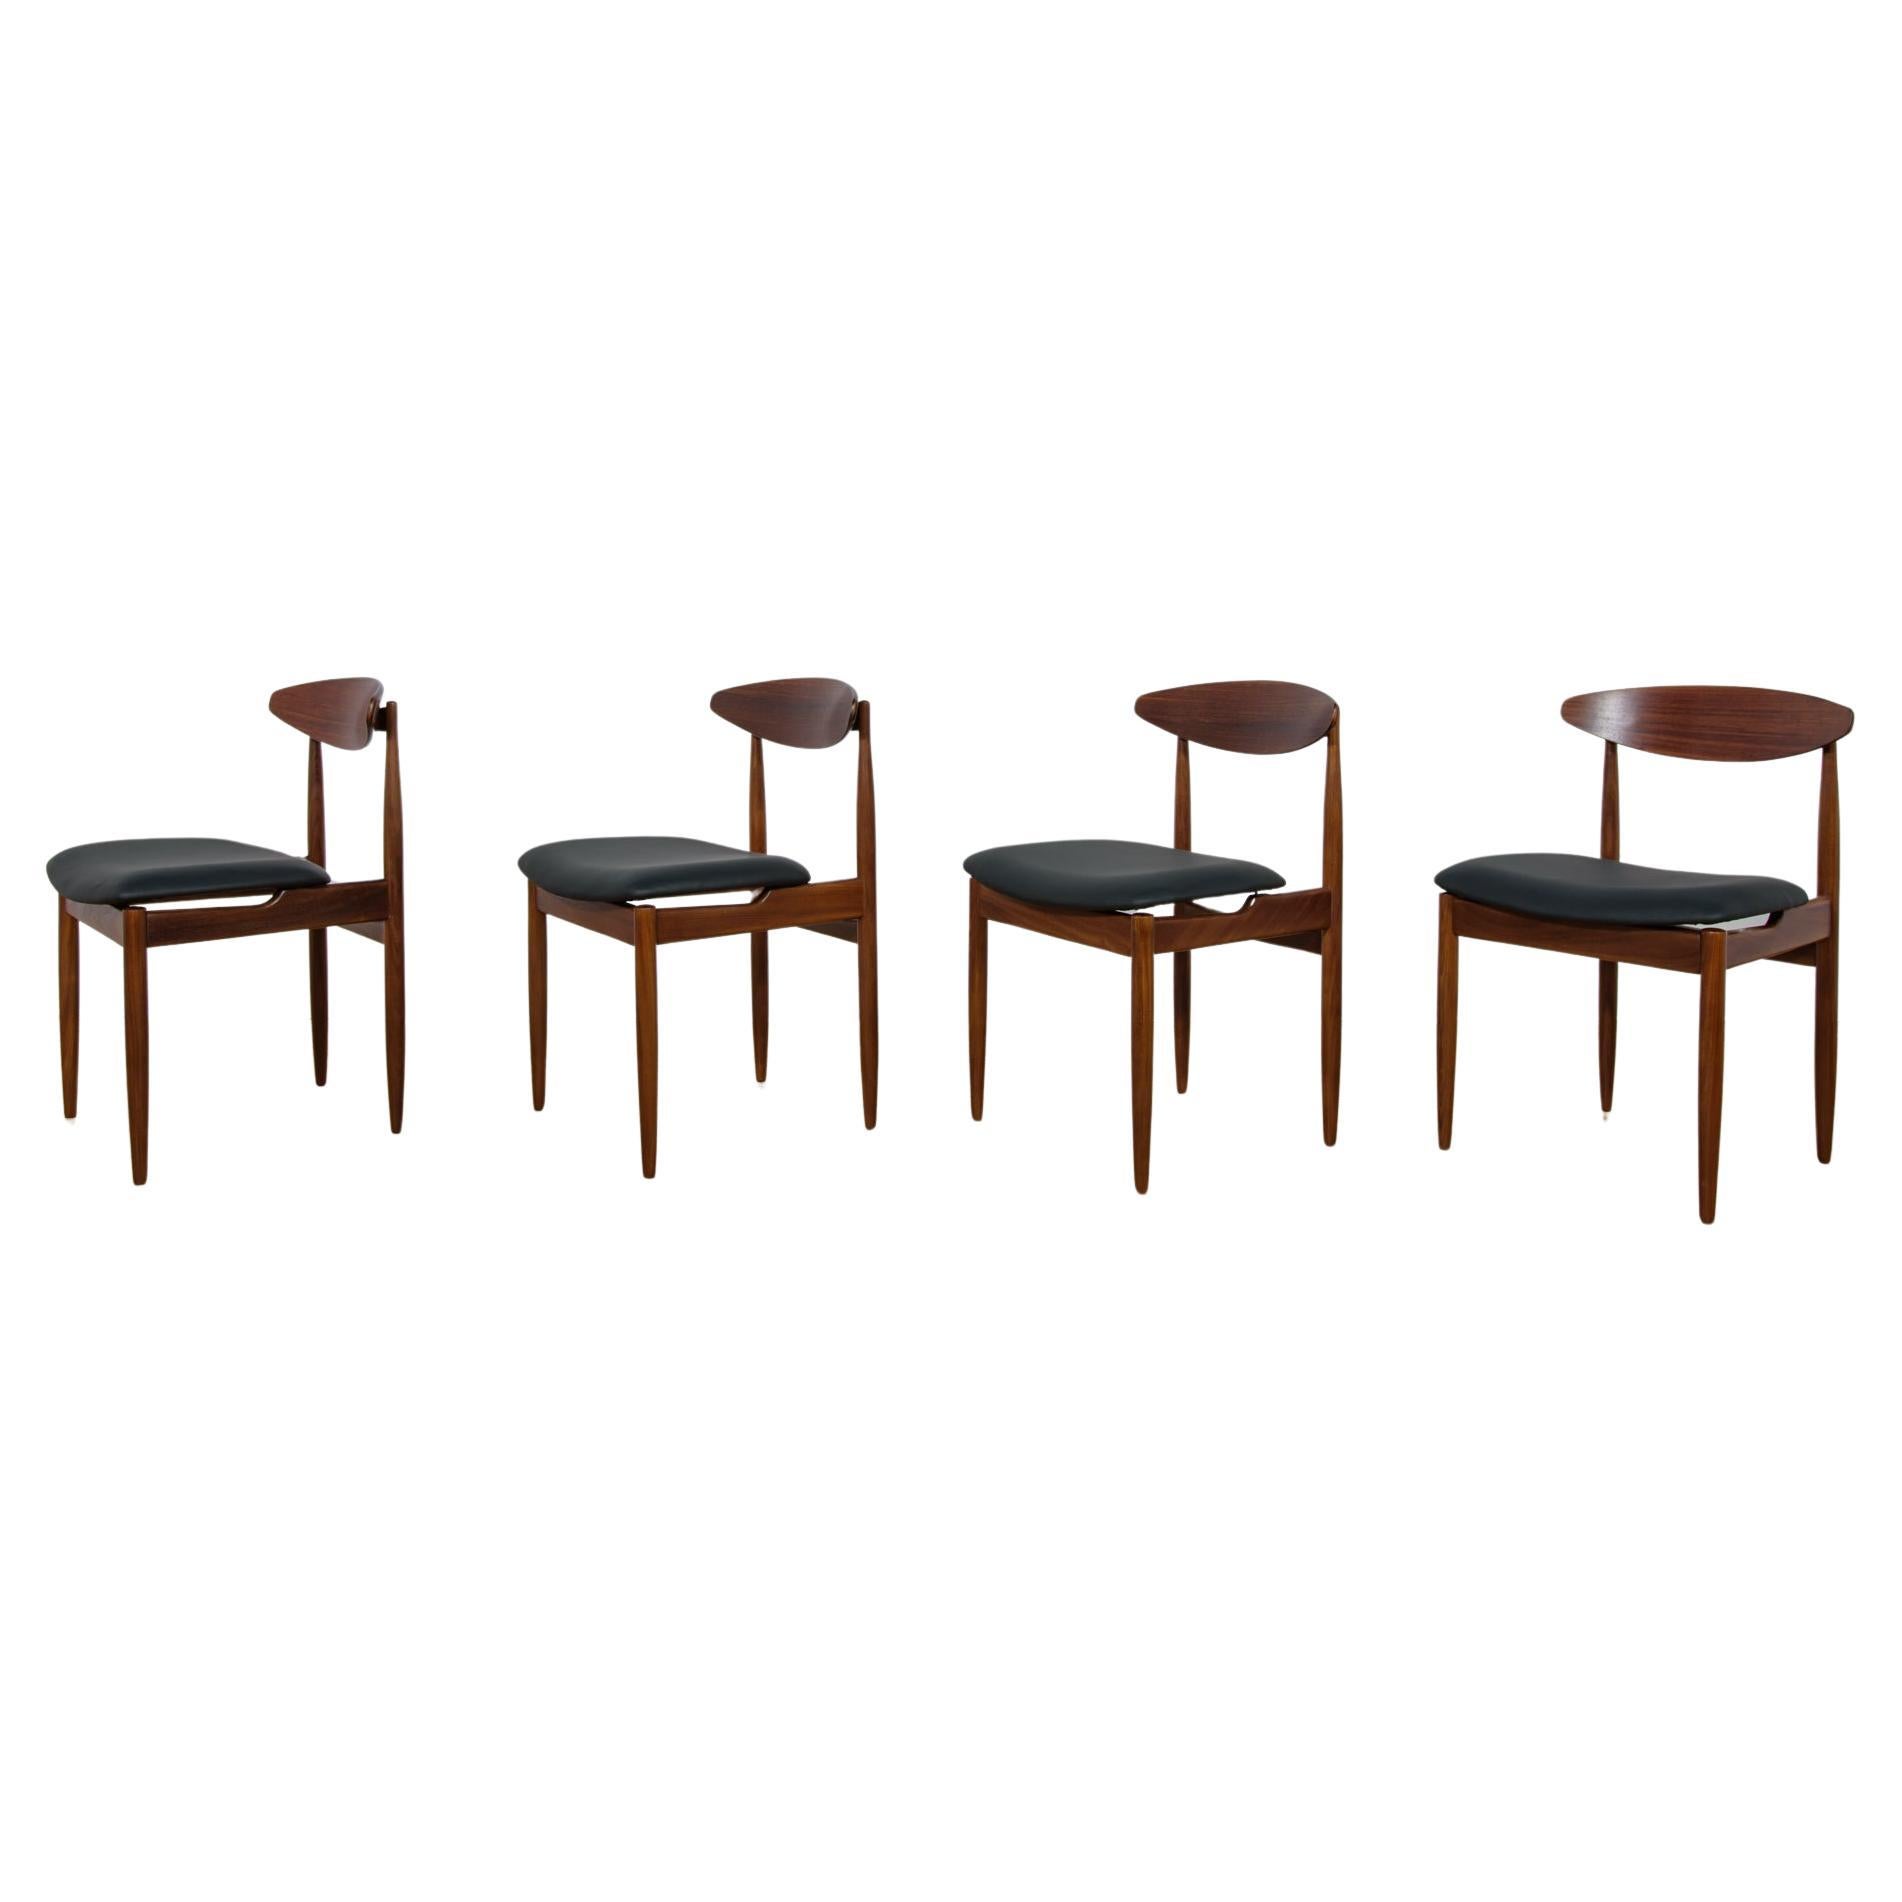  Mid-Century Dining Chairs in Teak by Ib Kofod Larsen for G-Plan, 1960s.